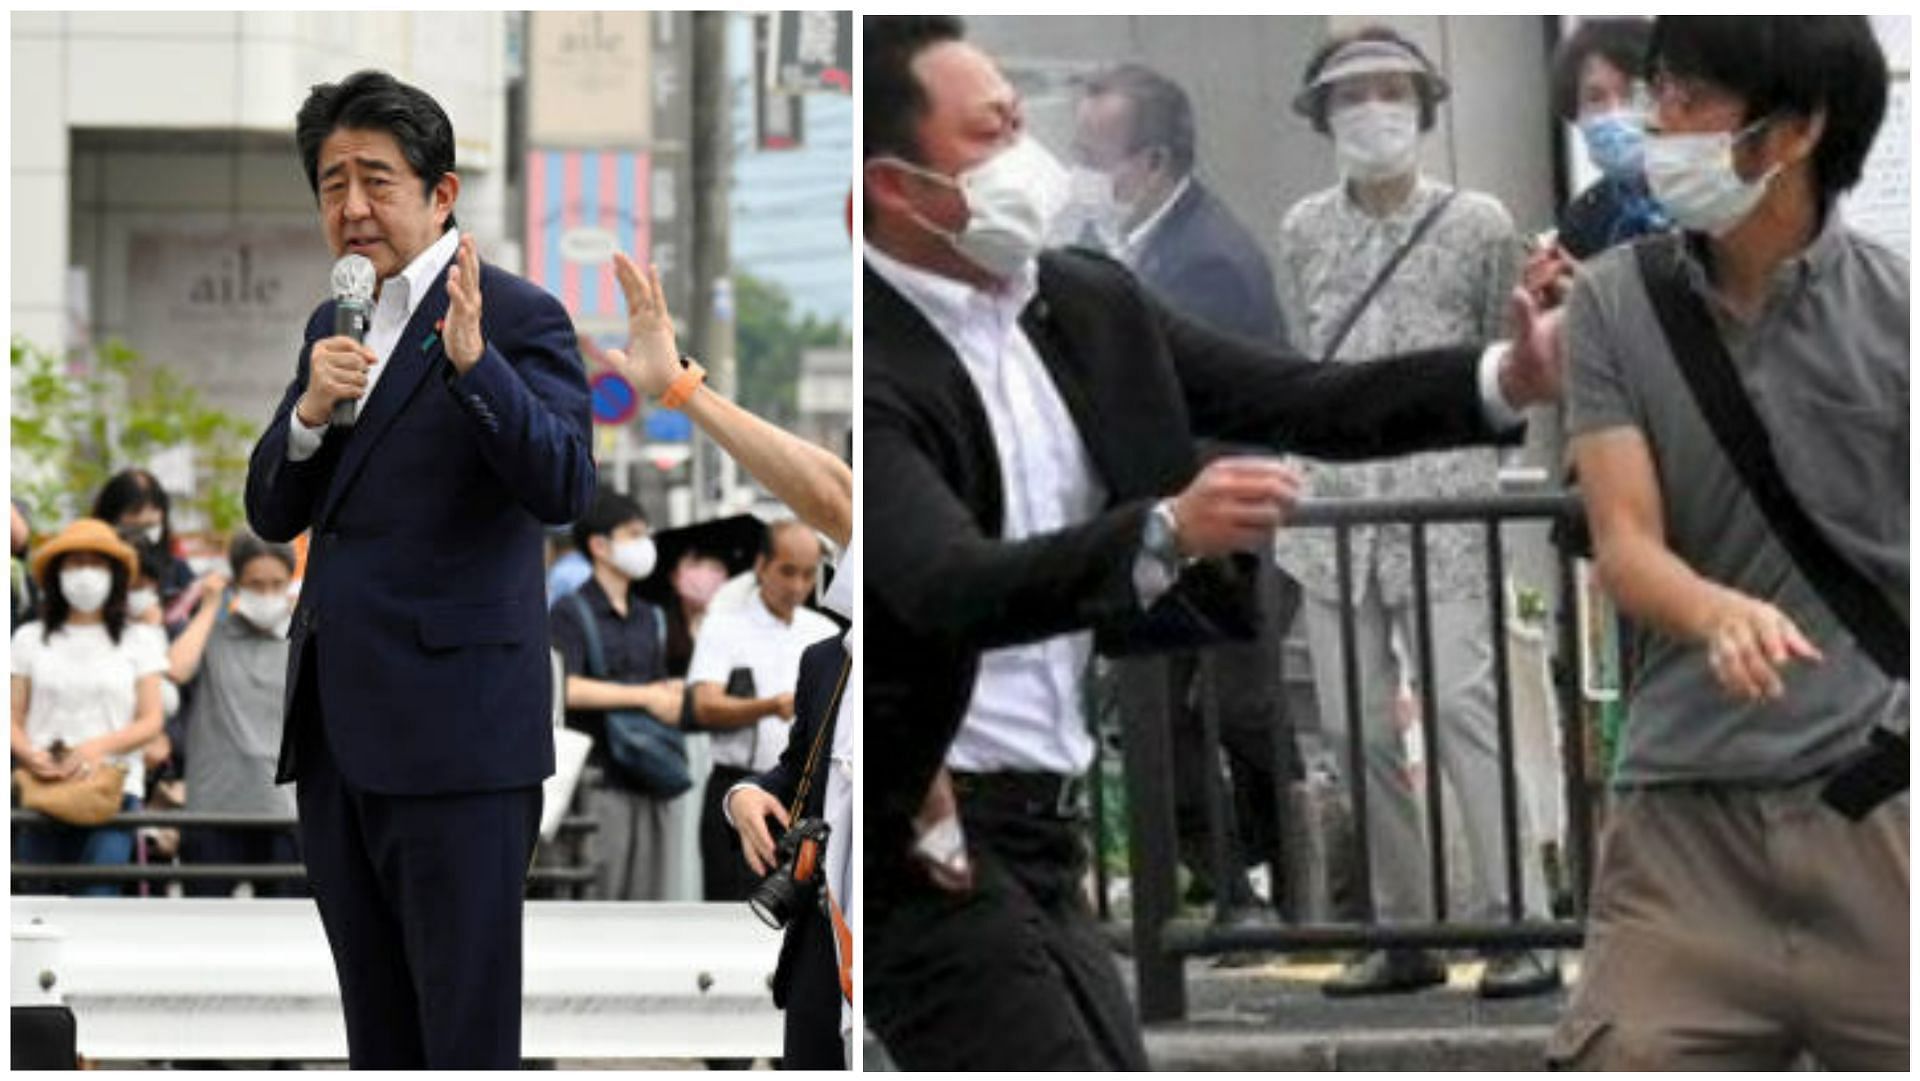 Shinzo Abe giving a speech (Left) and security guards tackling Yamagami seconds after the attack (Right) (Images via Masaki/Twitter, Getty Images)